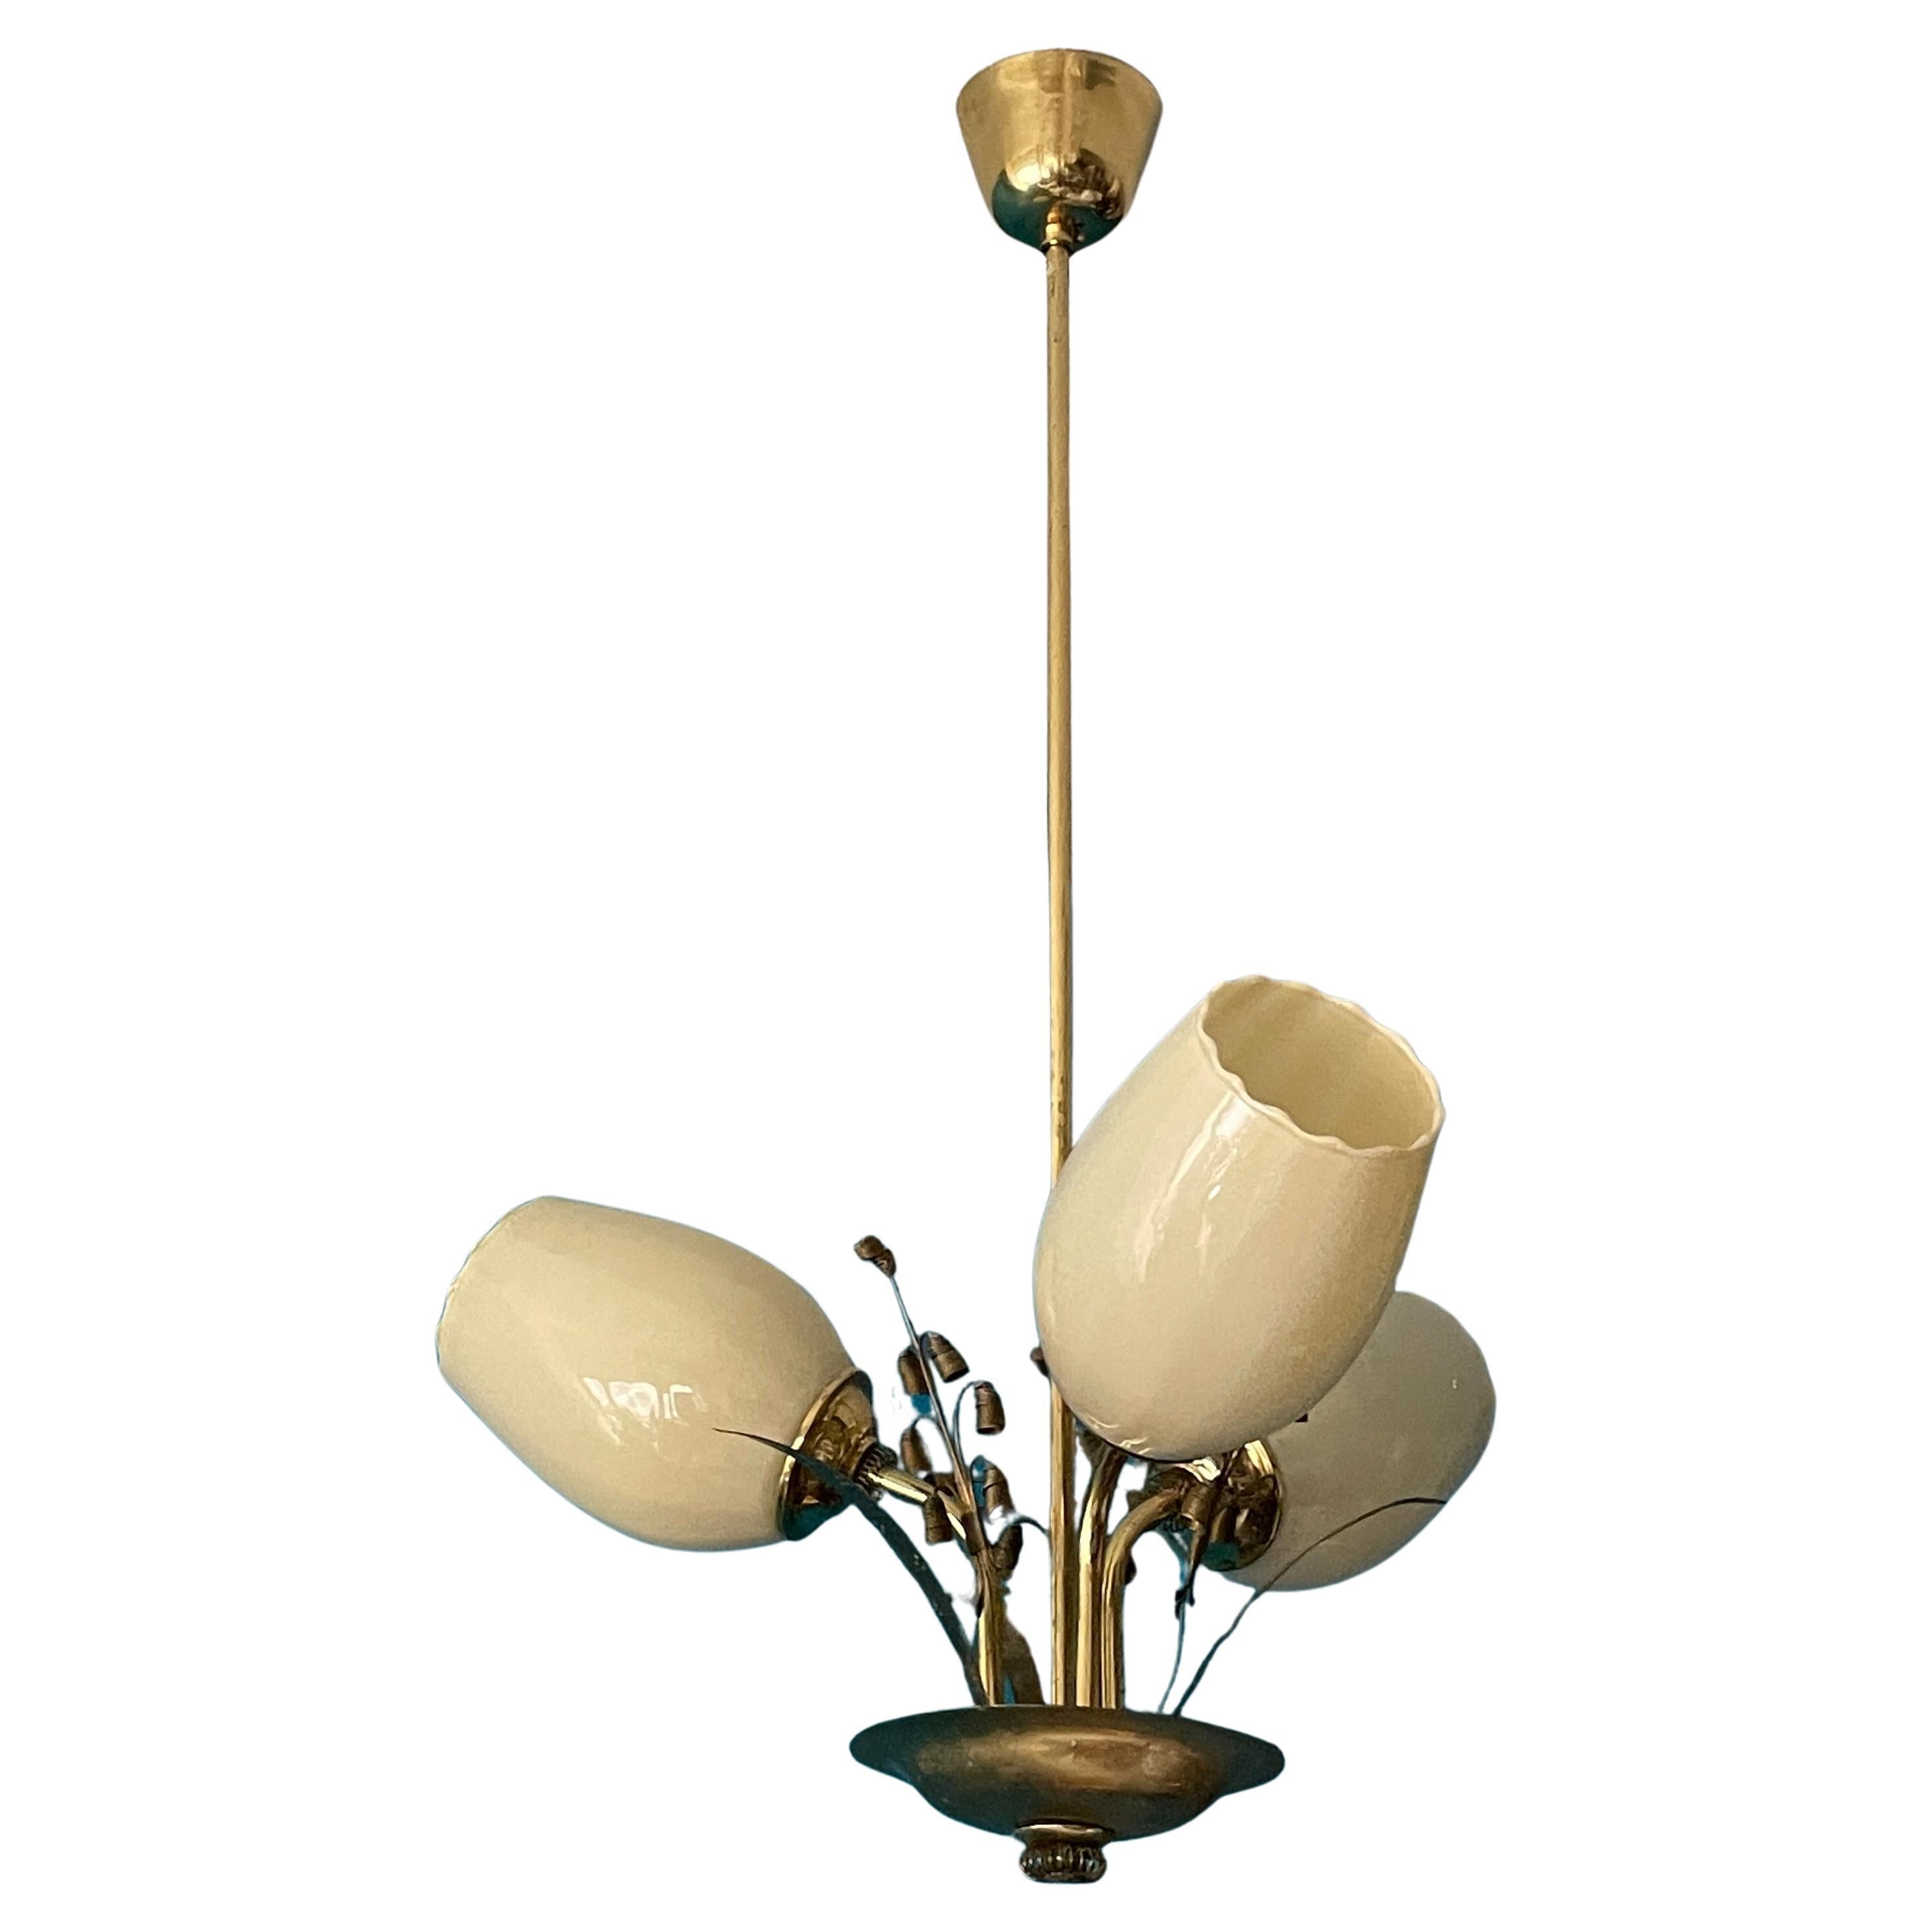 Mid-20th Century Brass Chandelier, Paavo Tynell Style, Made in Finland